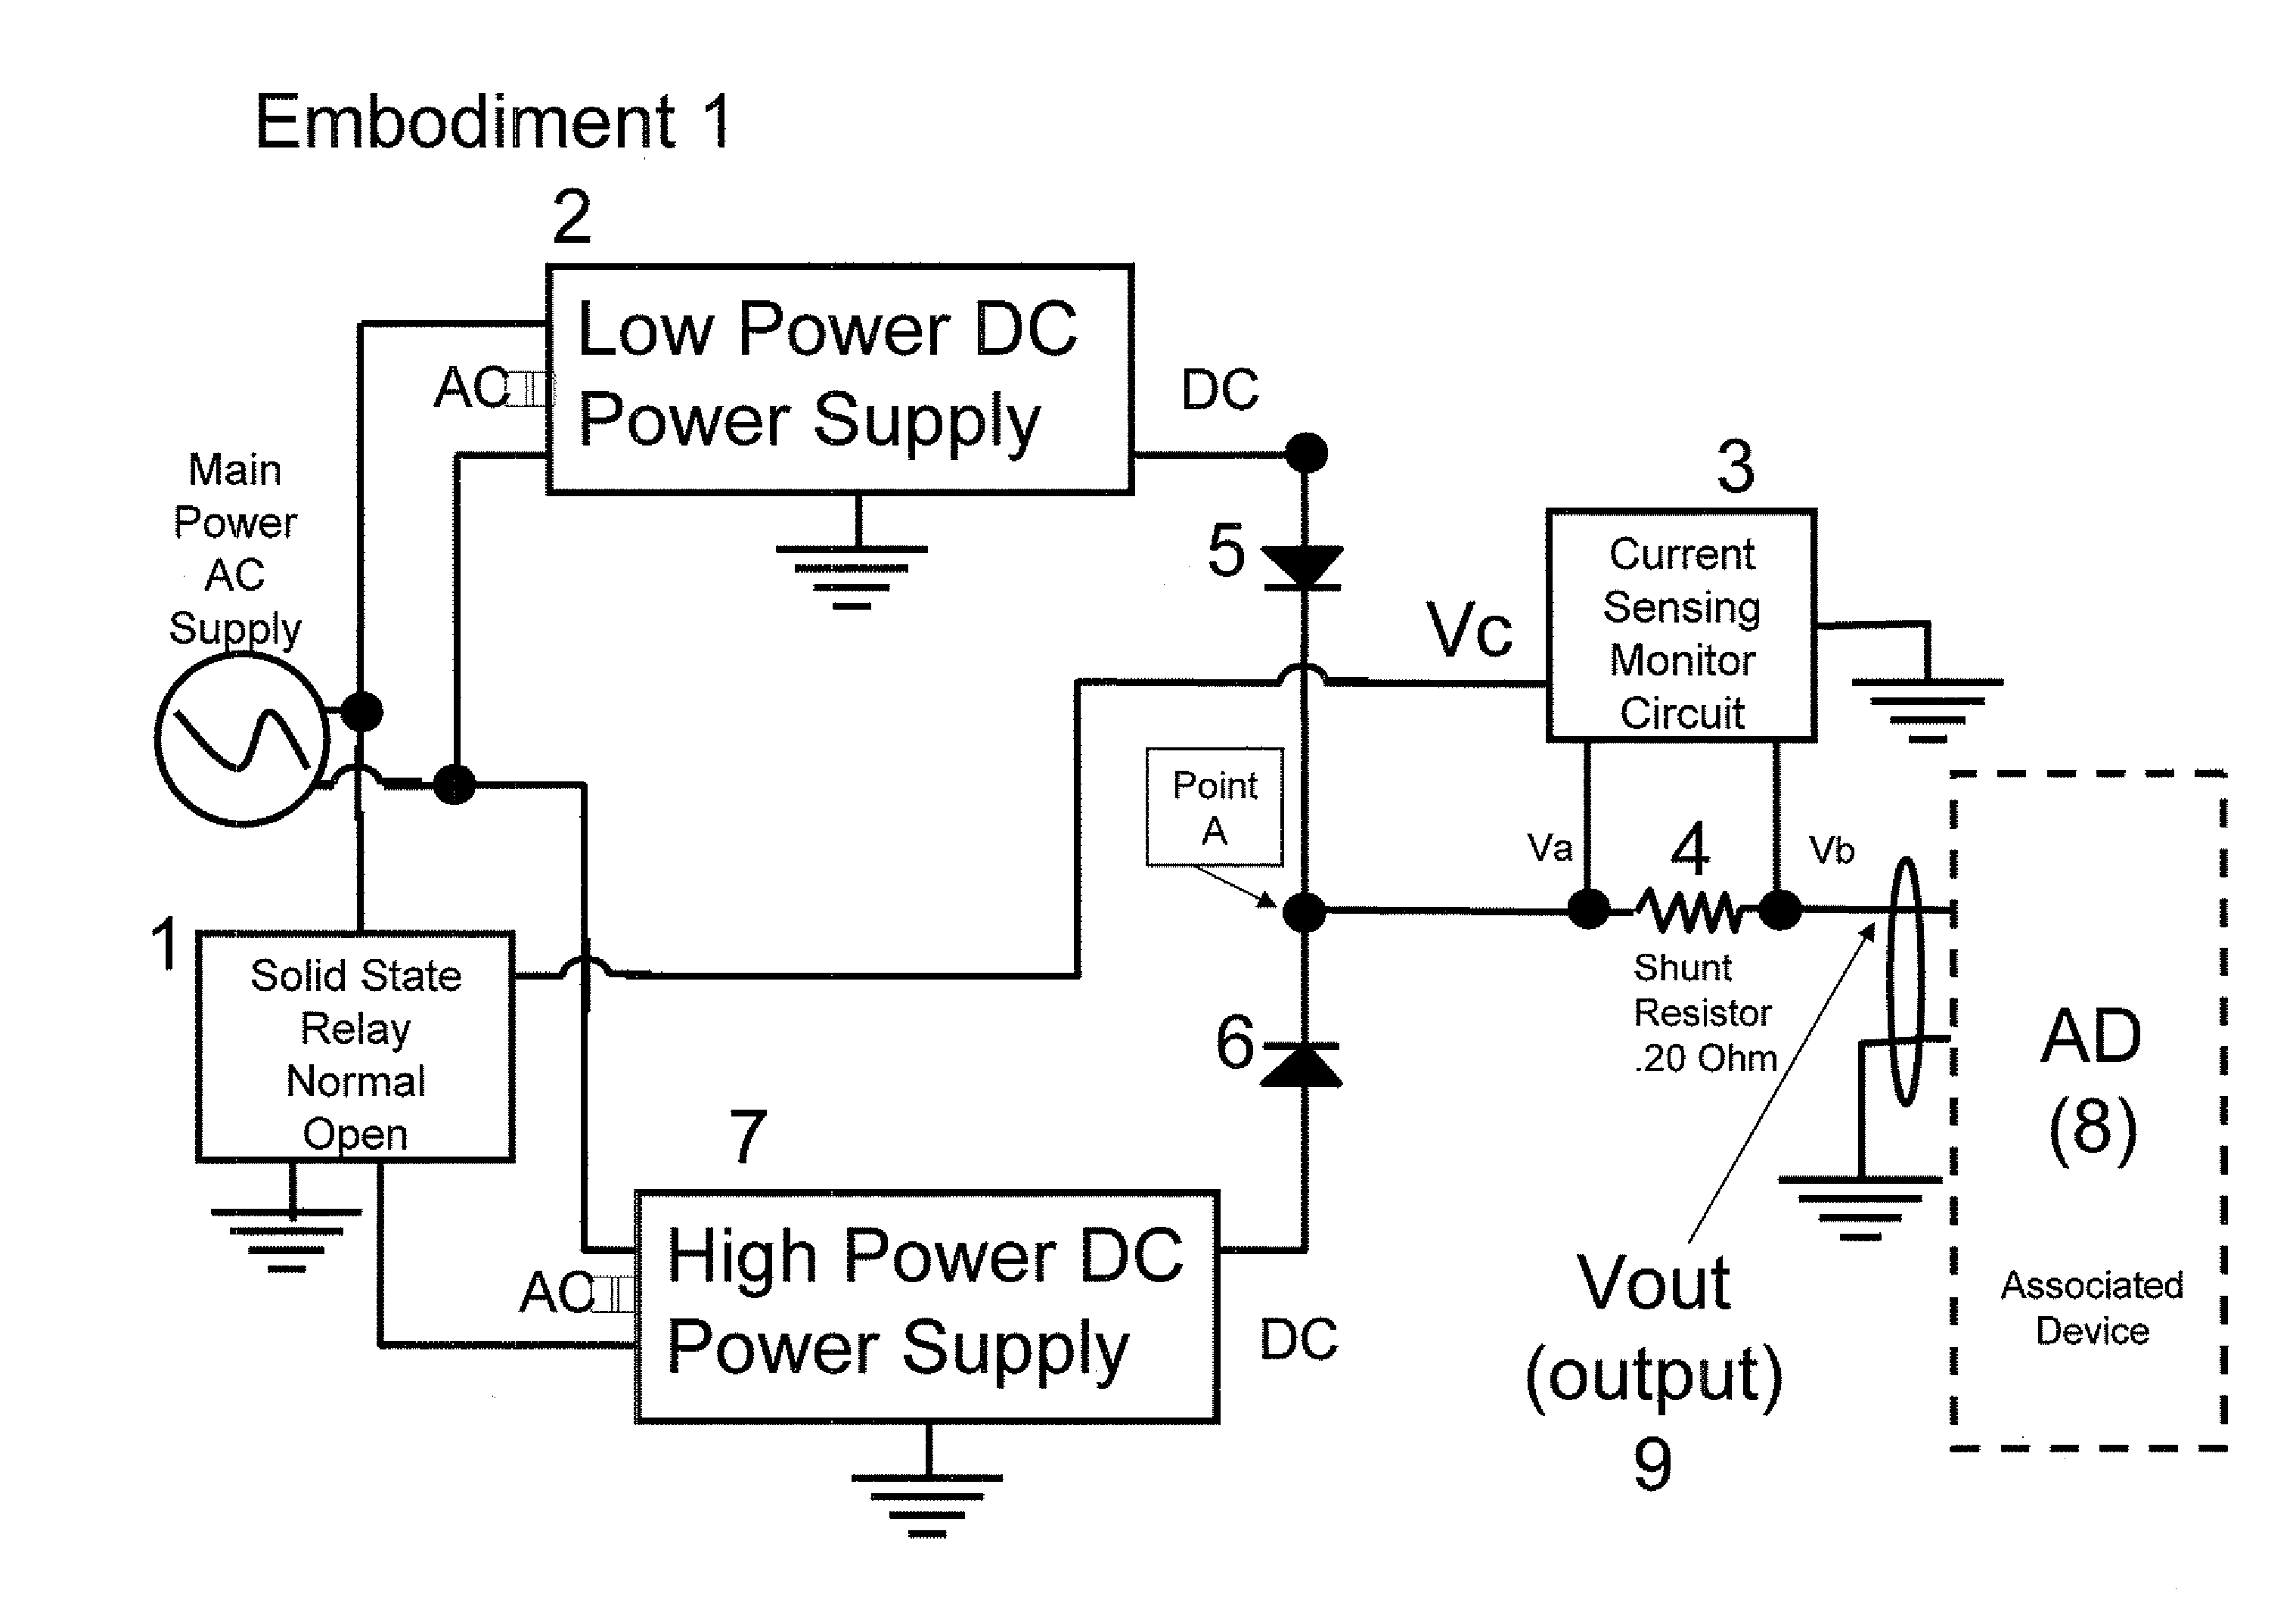 Energy conserving (stand-by mode) power saving design for battery chargers and power supplies